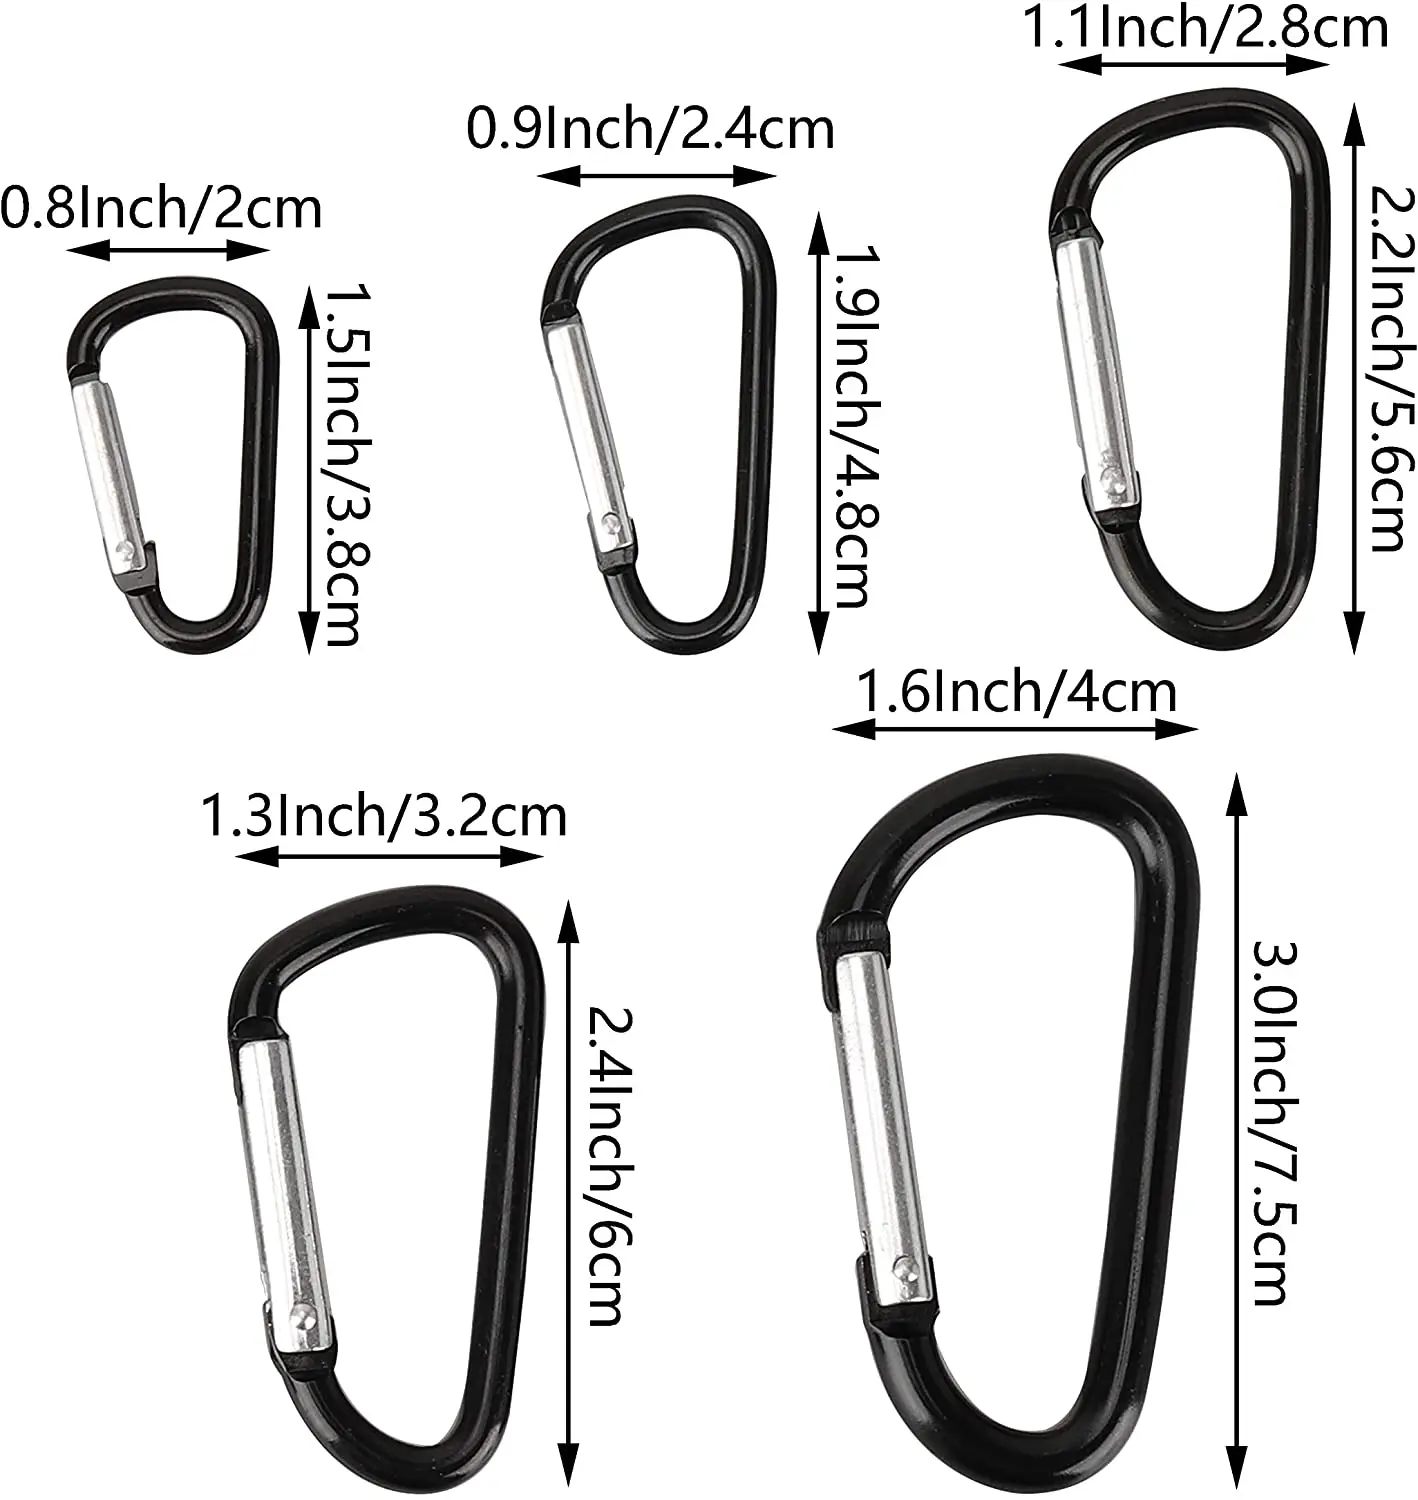 Details about   1Pc Carabiner Clip Aluminum Alloy Keychain Carabiner Locking Lightweight A4Q2 